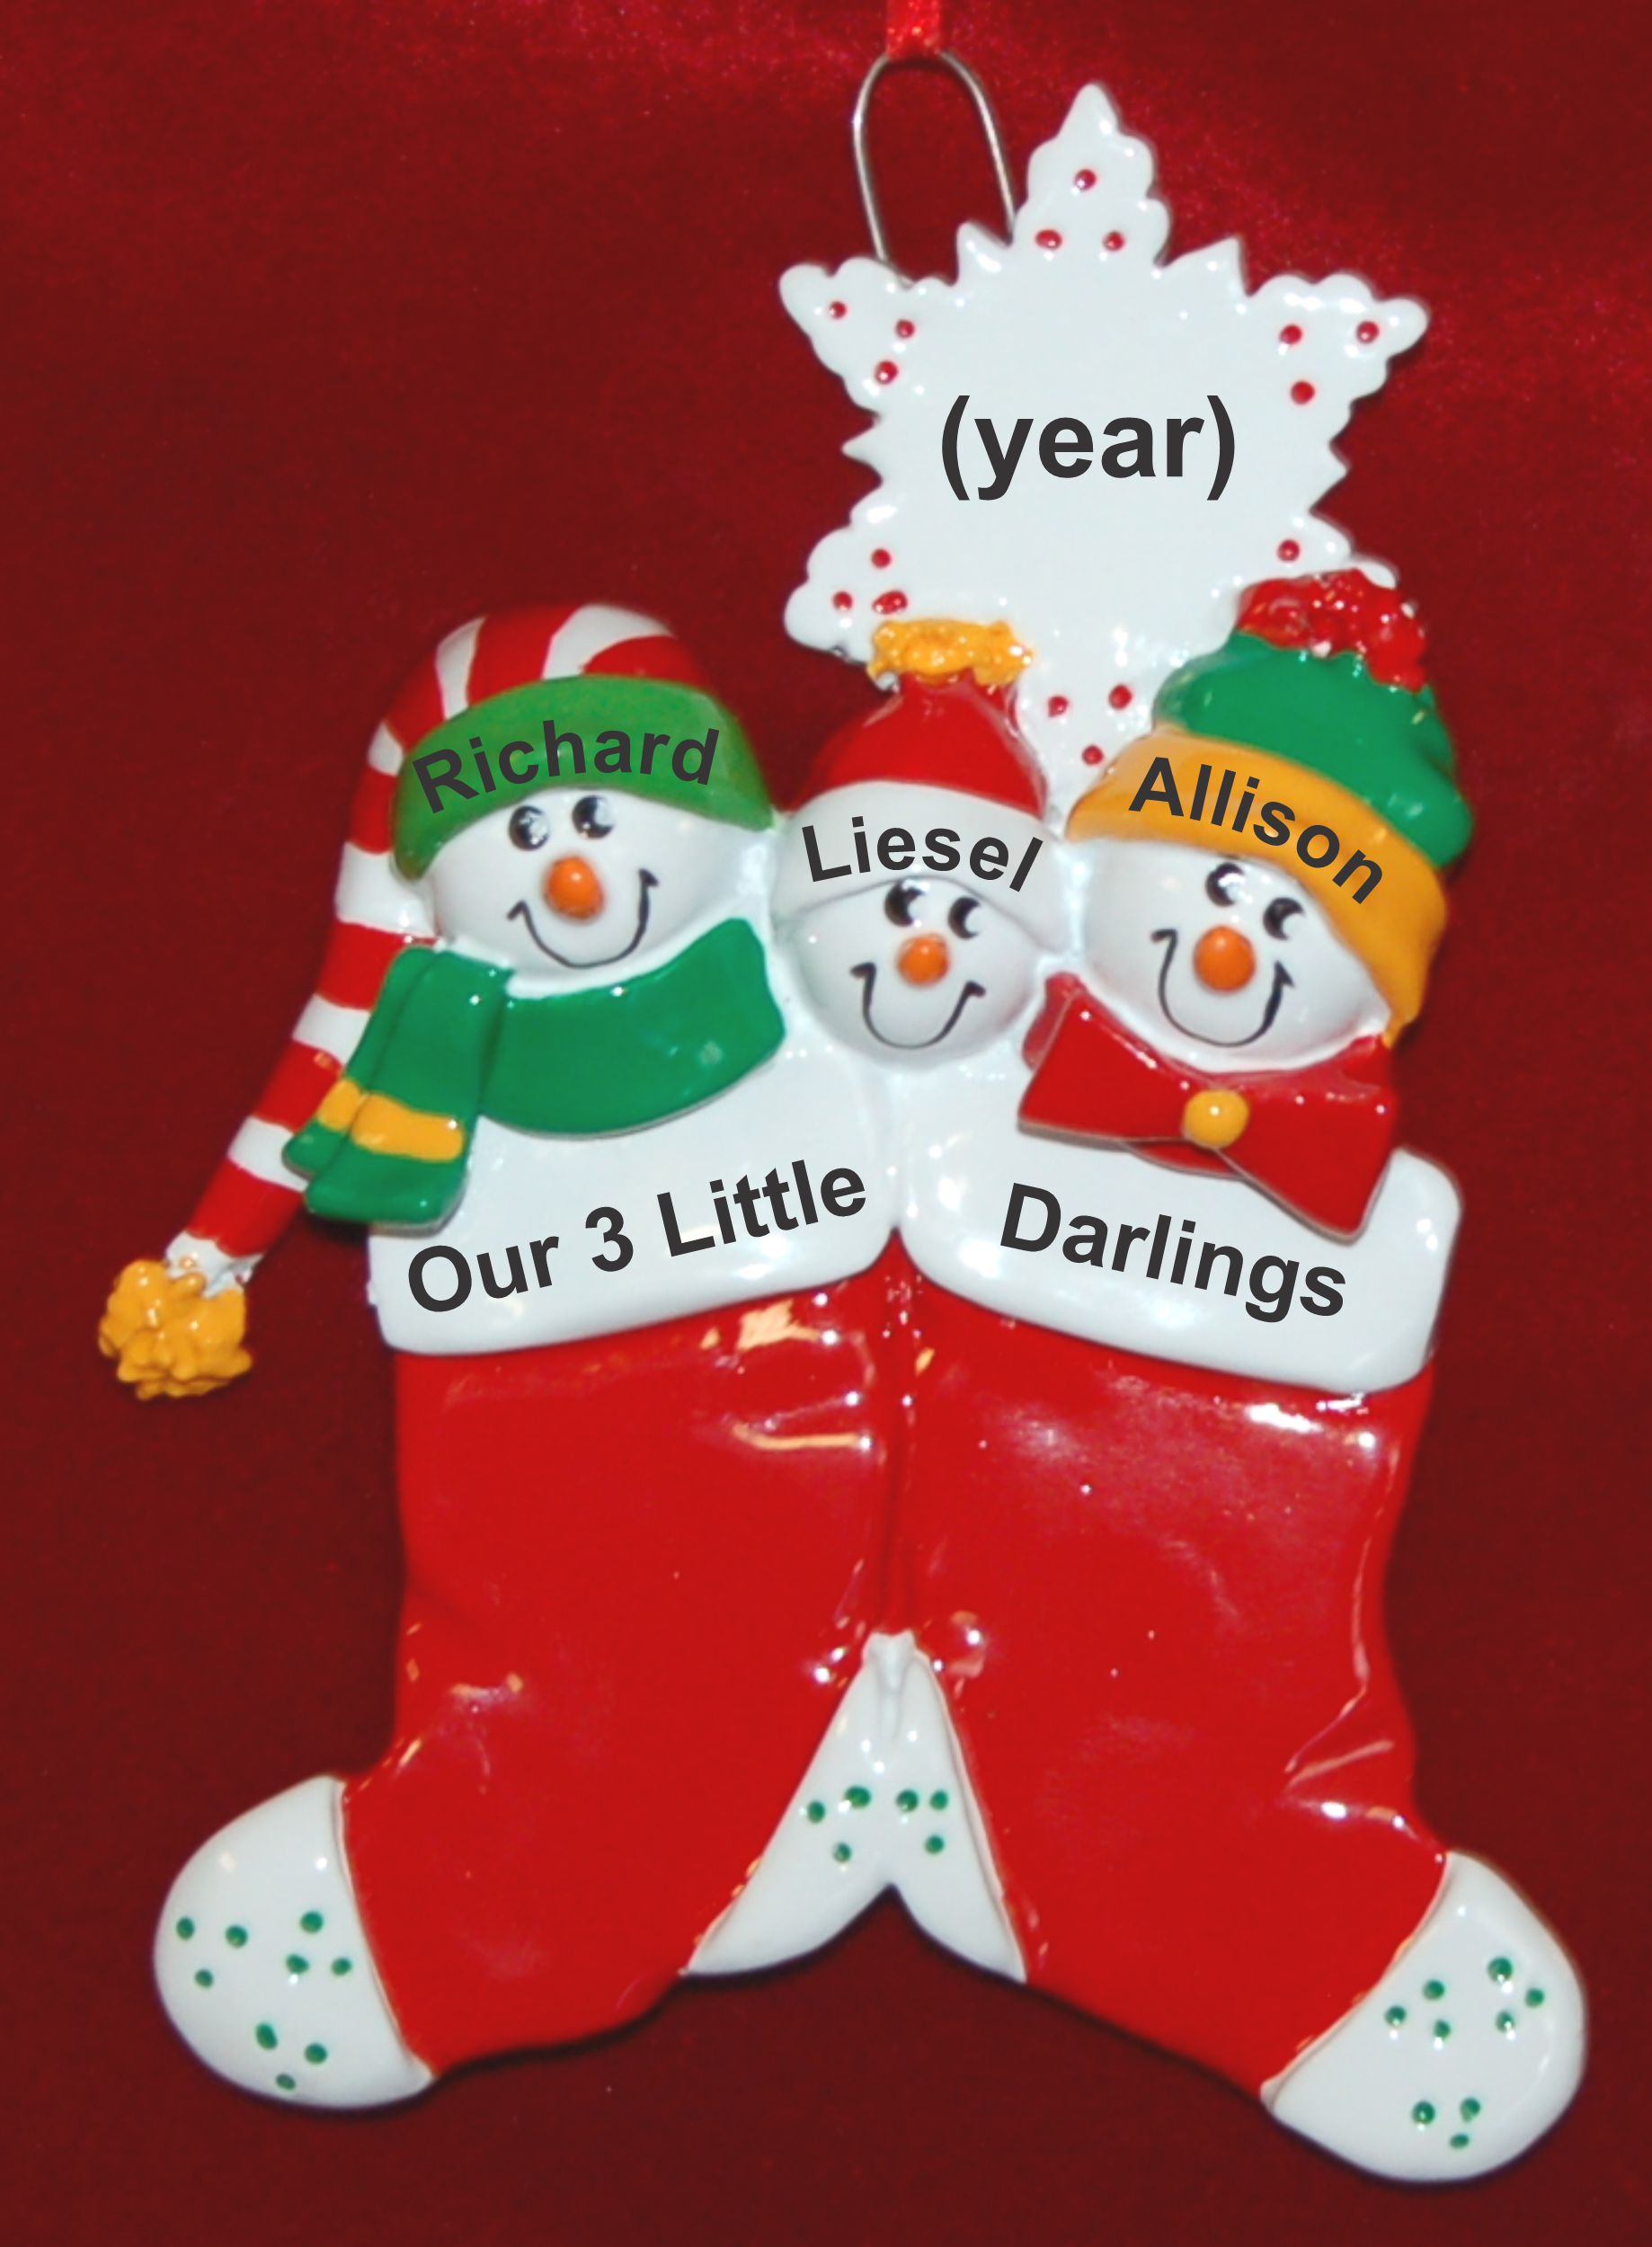 Personalized Family Christmas Ornament Festive Stockings Just the 3 Kids Personalized by Russell Rhodes